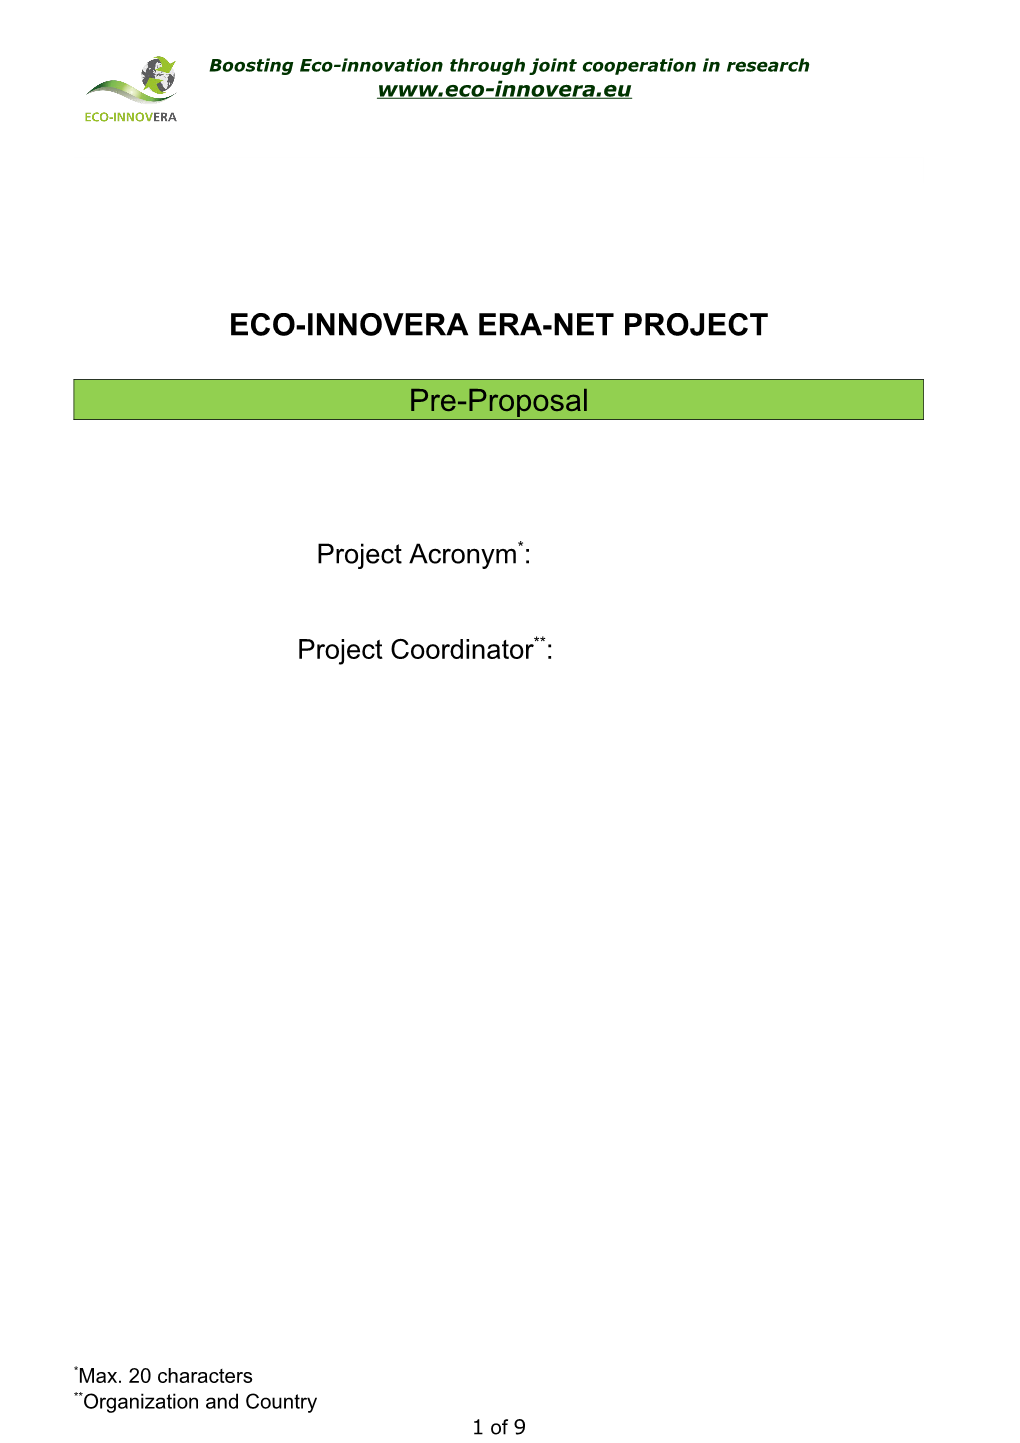 ERA-Net ECO-INNOVERA - Boosting Eco-Innovation Through Joint Cooperation in Research And